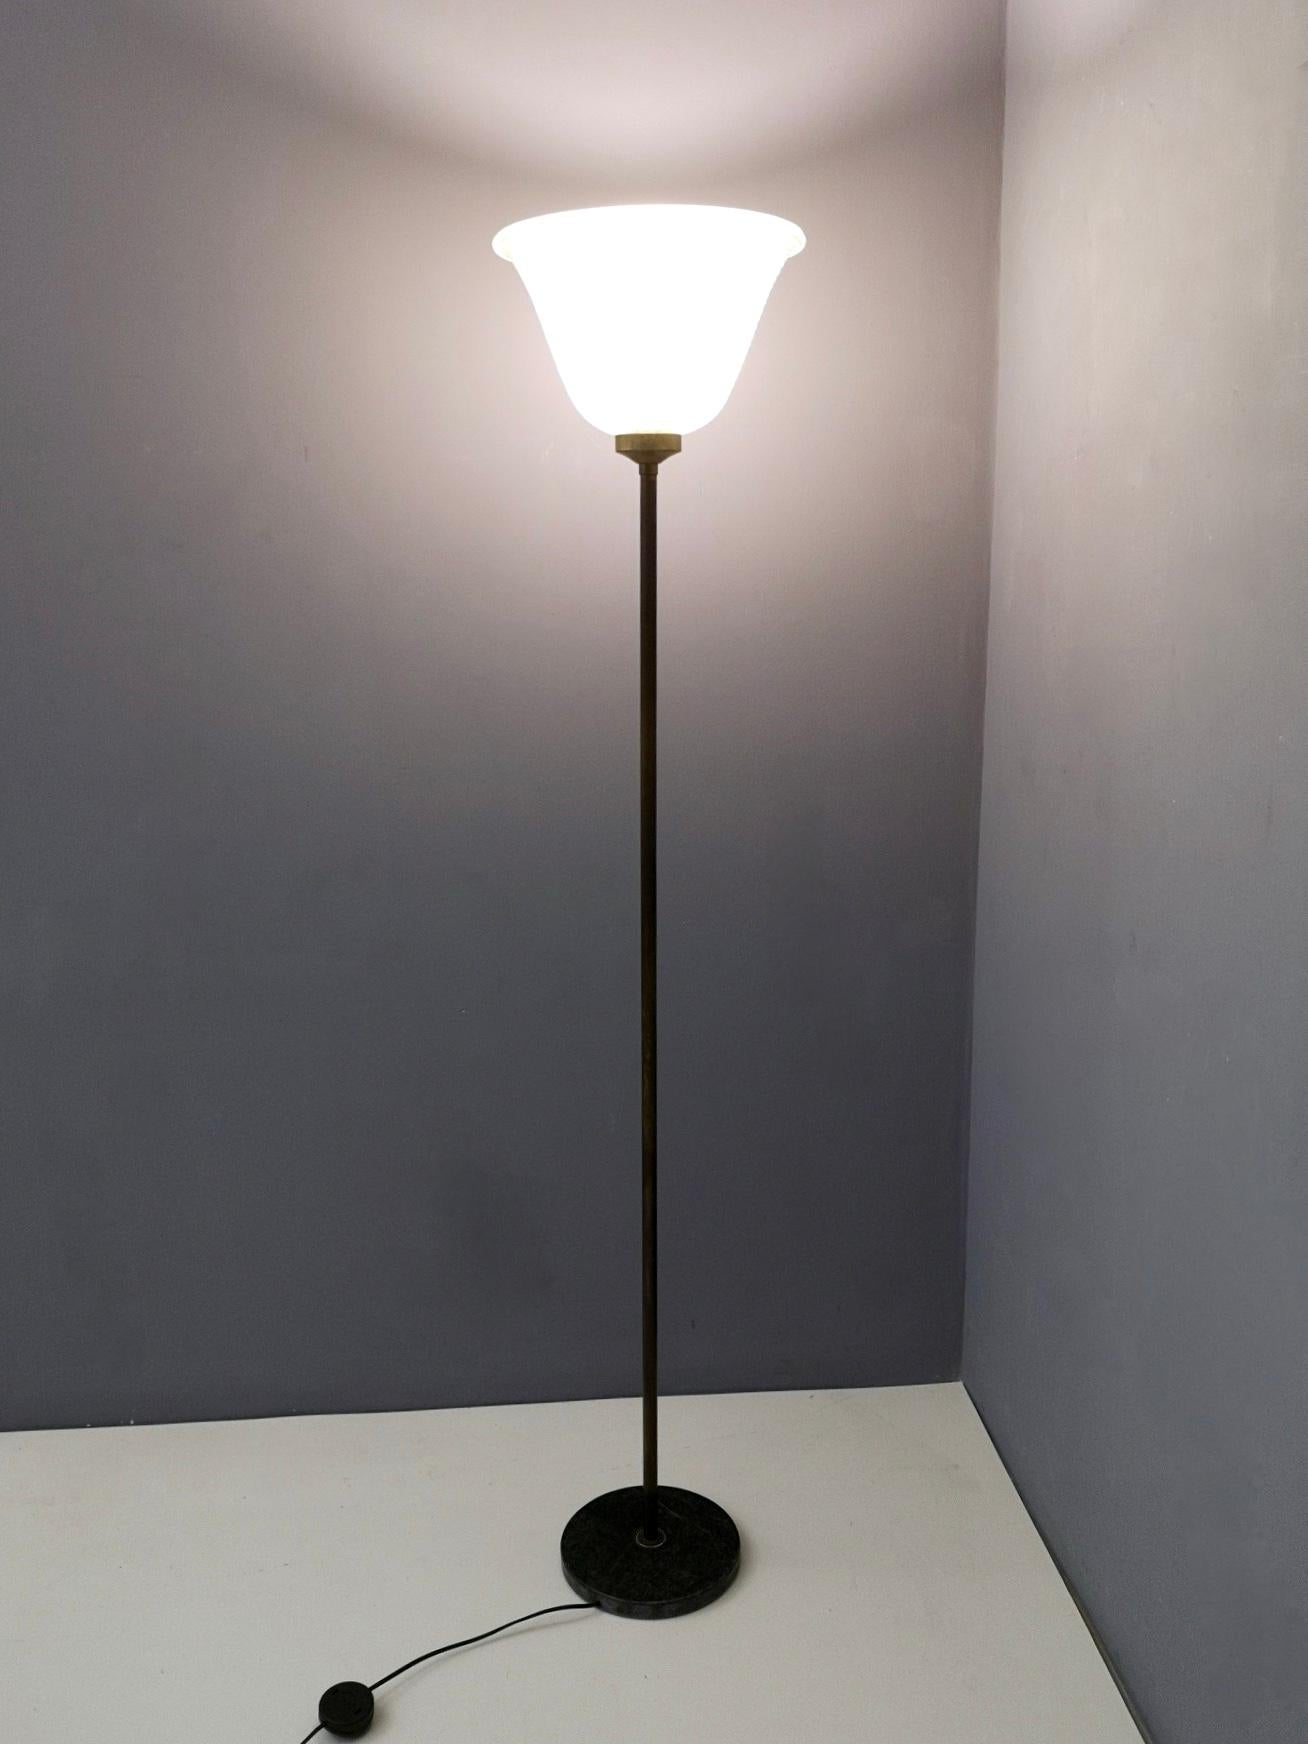 Handmade in Murano, Italy, 1950s.
It features a green alps marble base, brass details and an etched and blown glass lampshade with bubble inclusion due to its manufacturing.
This floor lamp has no damages or dents, and features its original